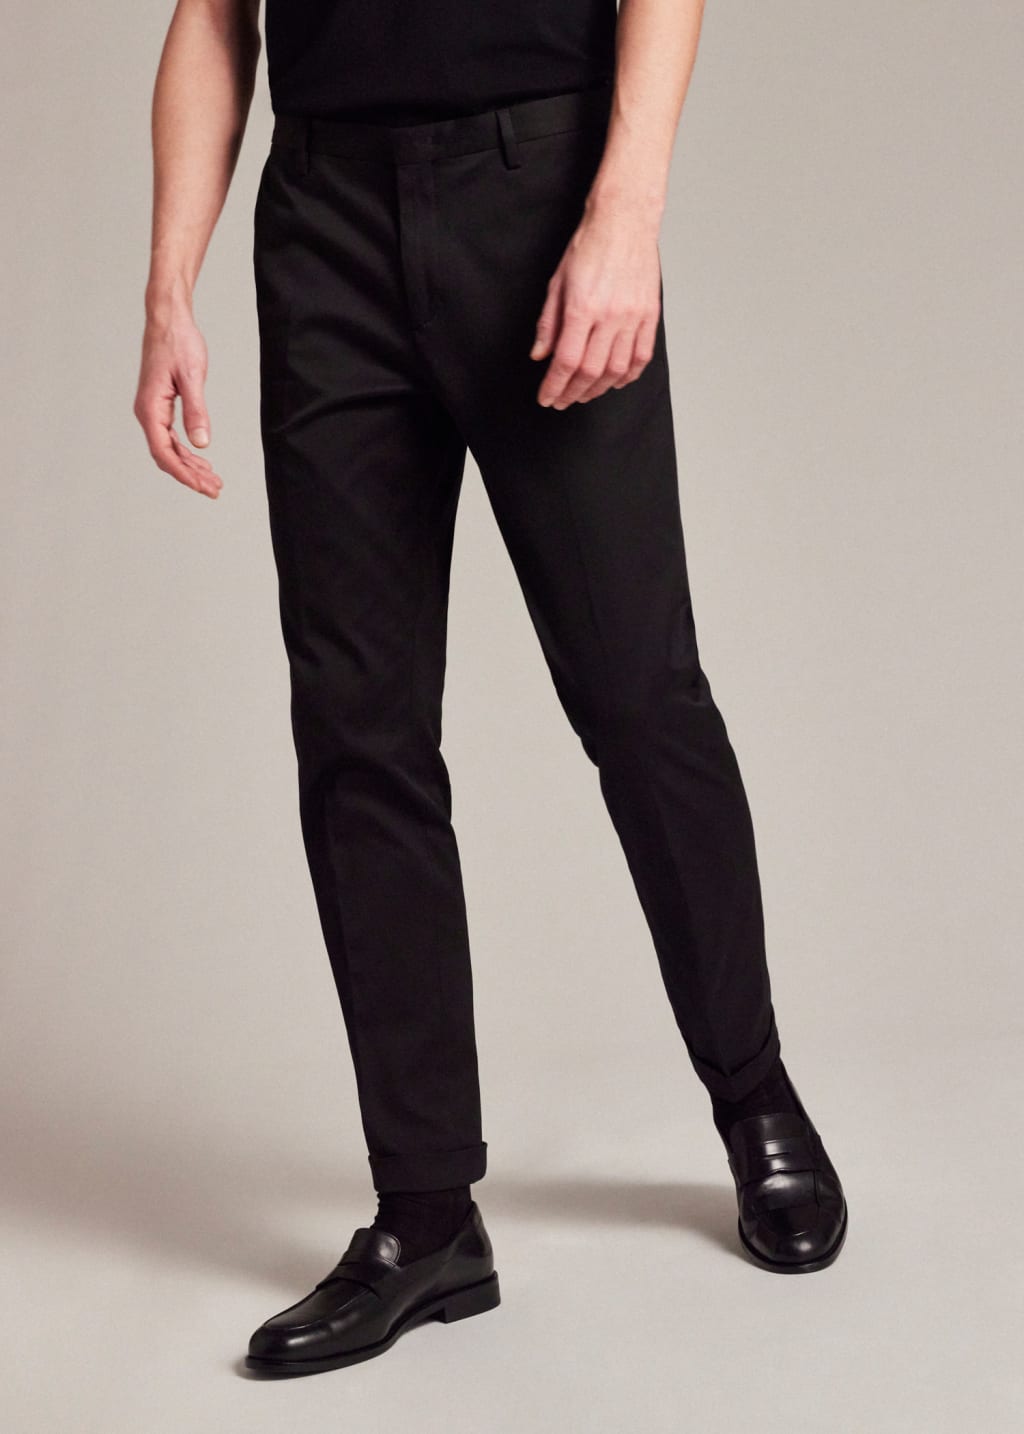 Model View - Men's Slim-Fit Black Cotton-Stretch Chinos by Paul Smith